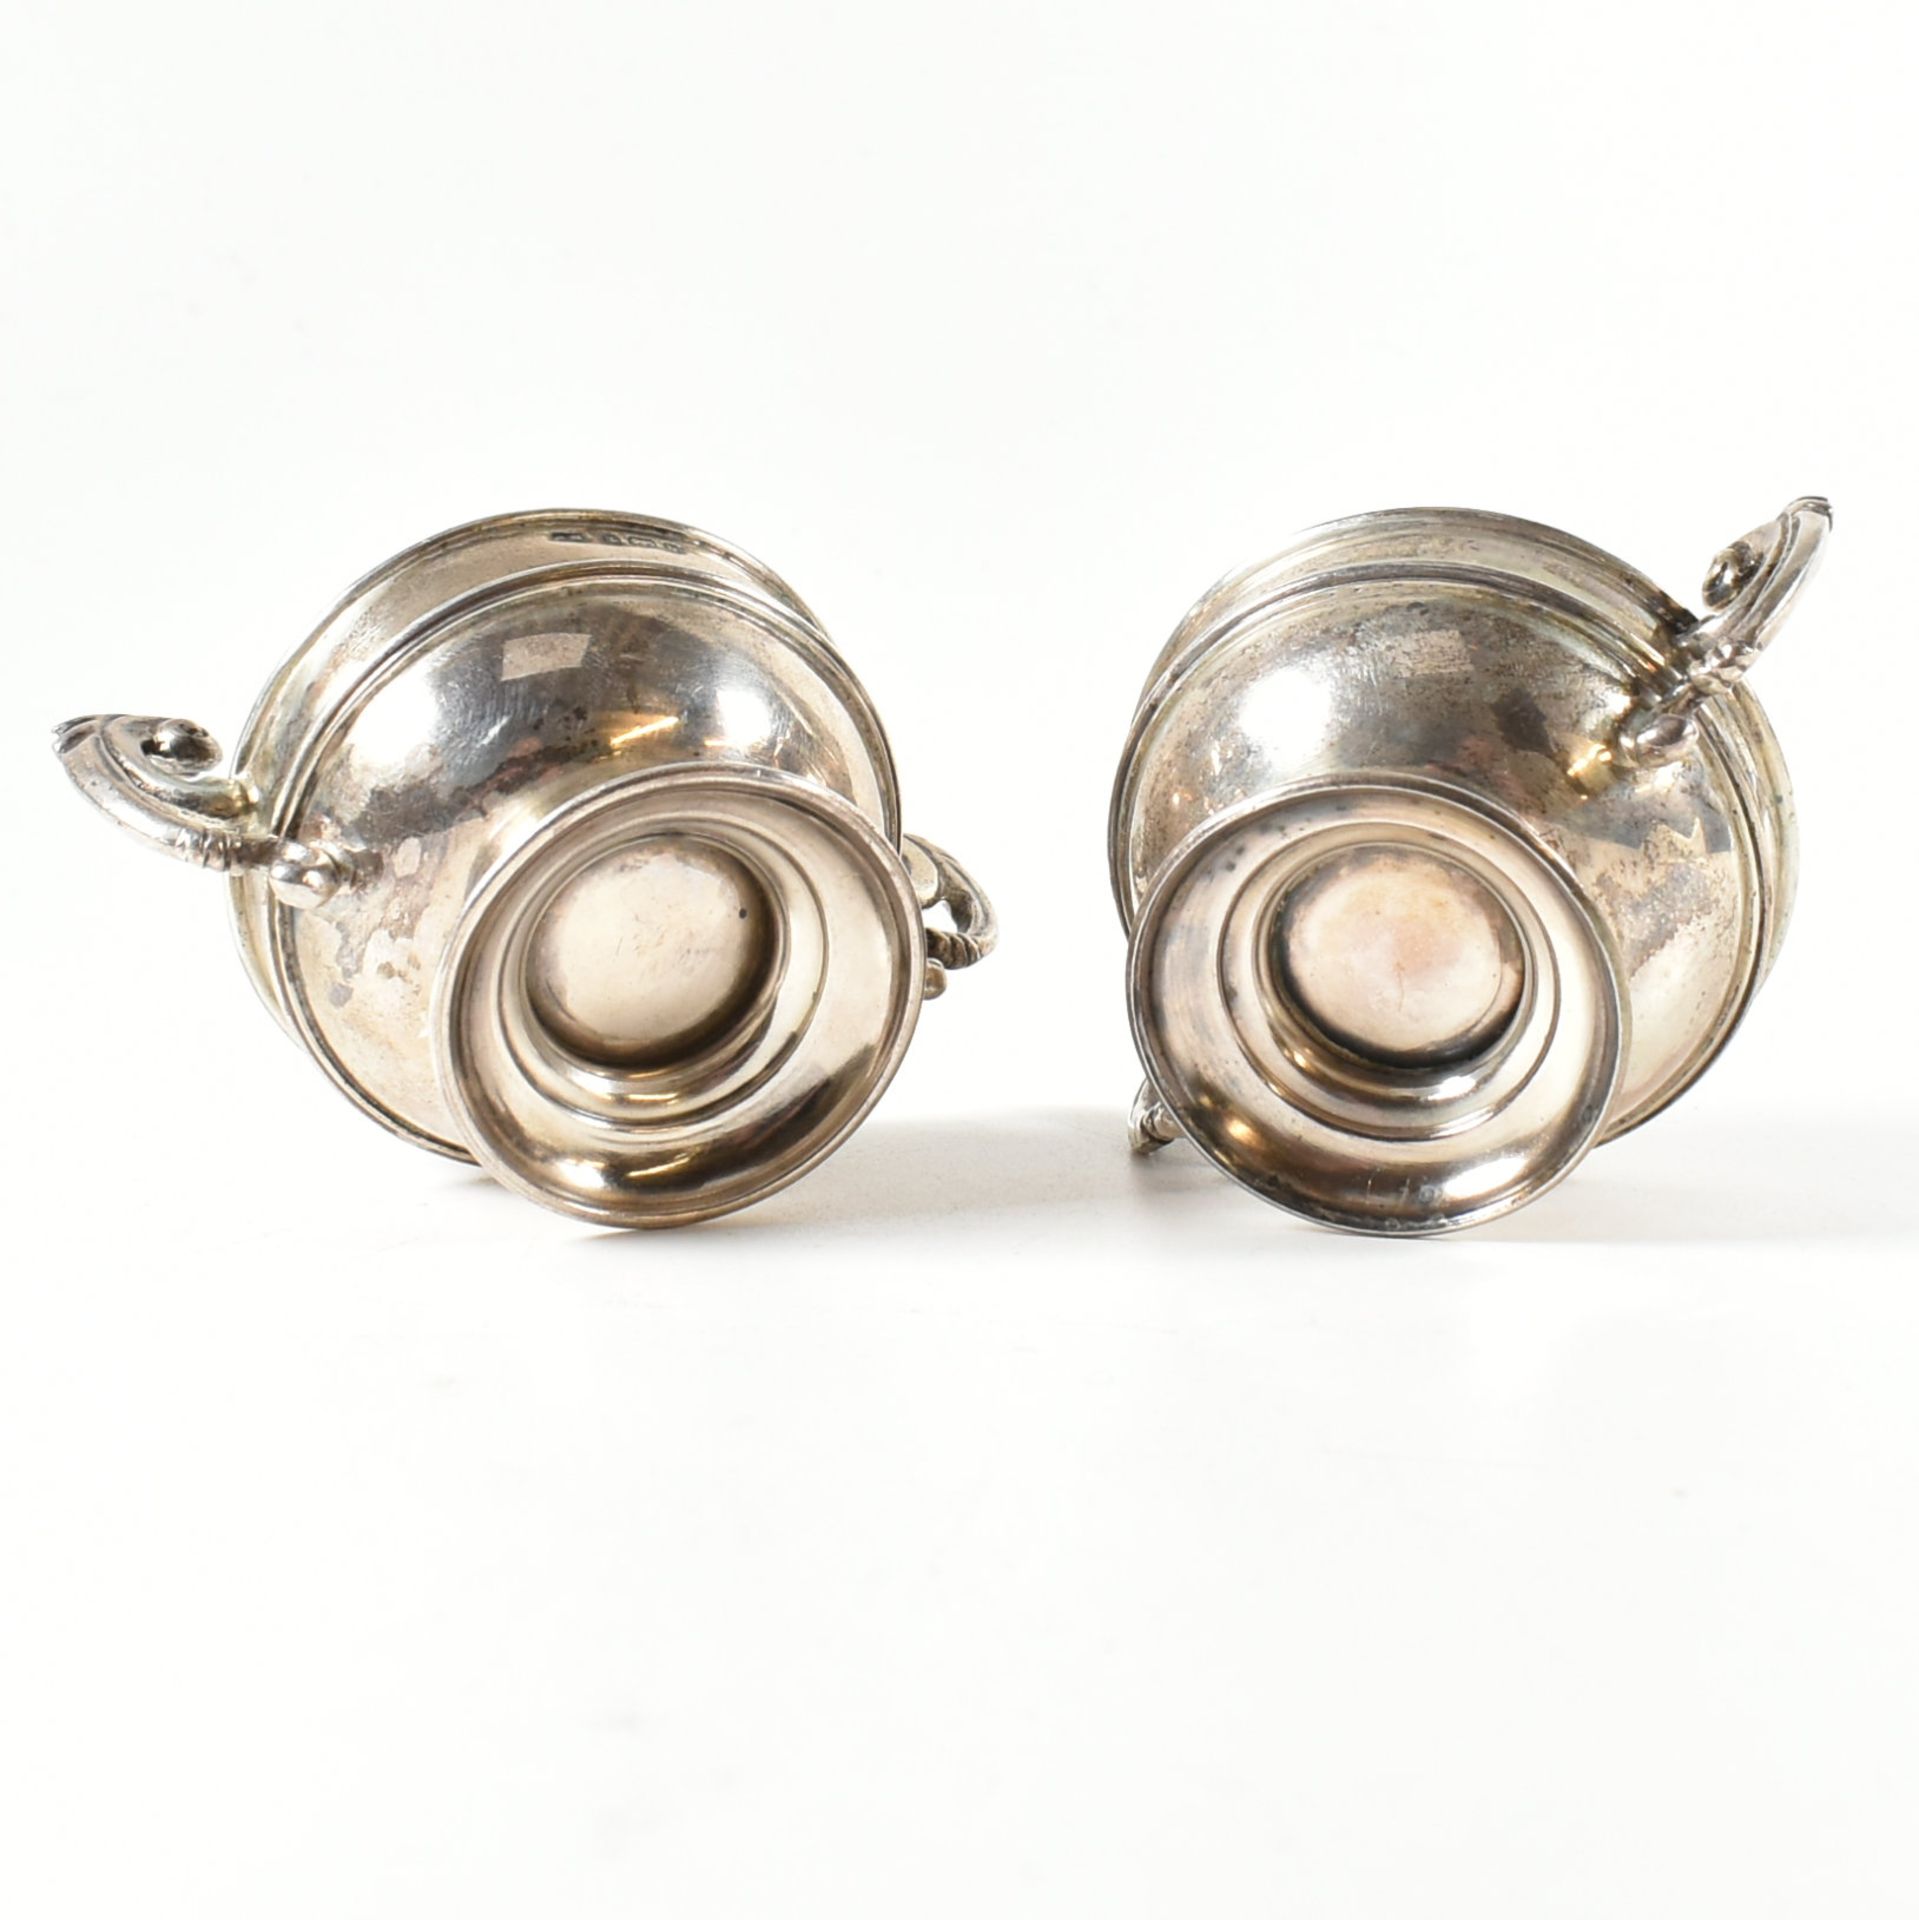 PAIR OF LATE VICTORIAN HALLMARKED SILVER SALTS CHARLES HORNER - Image 7 of 9